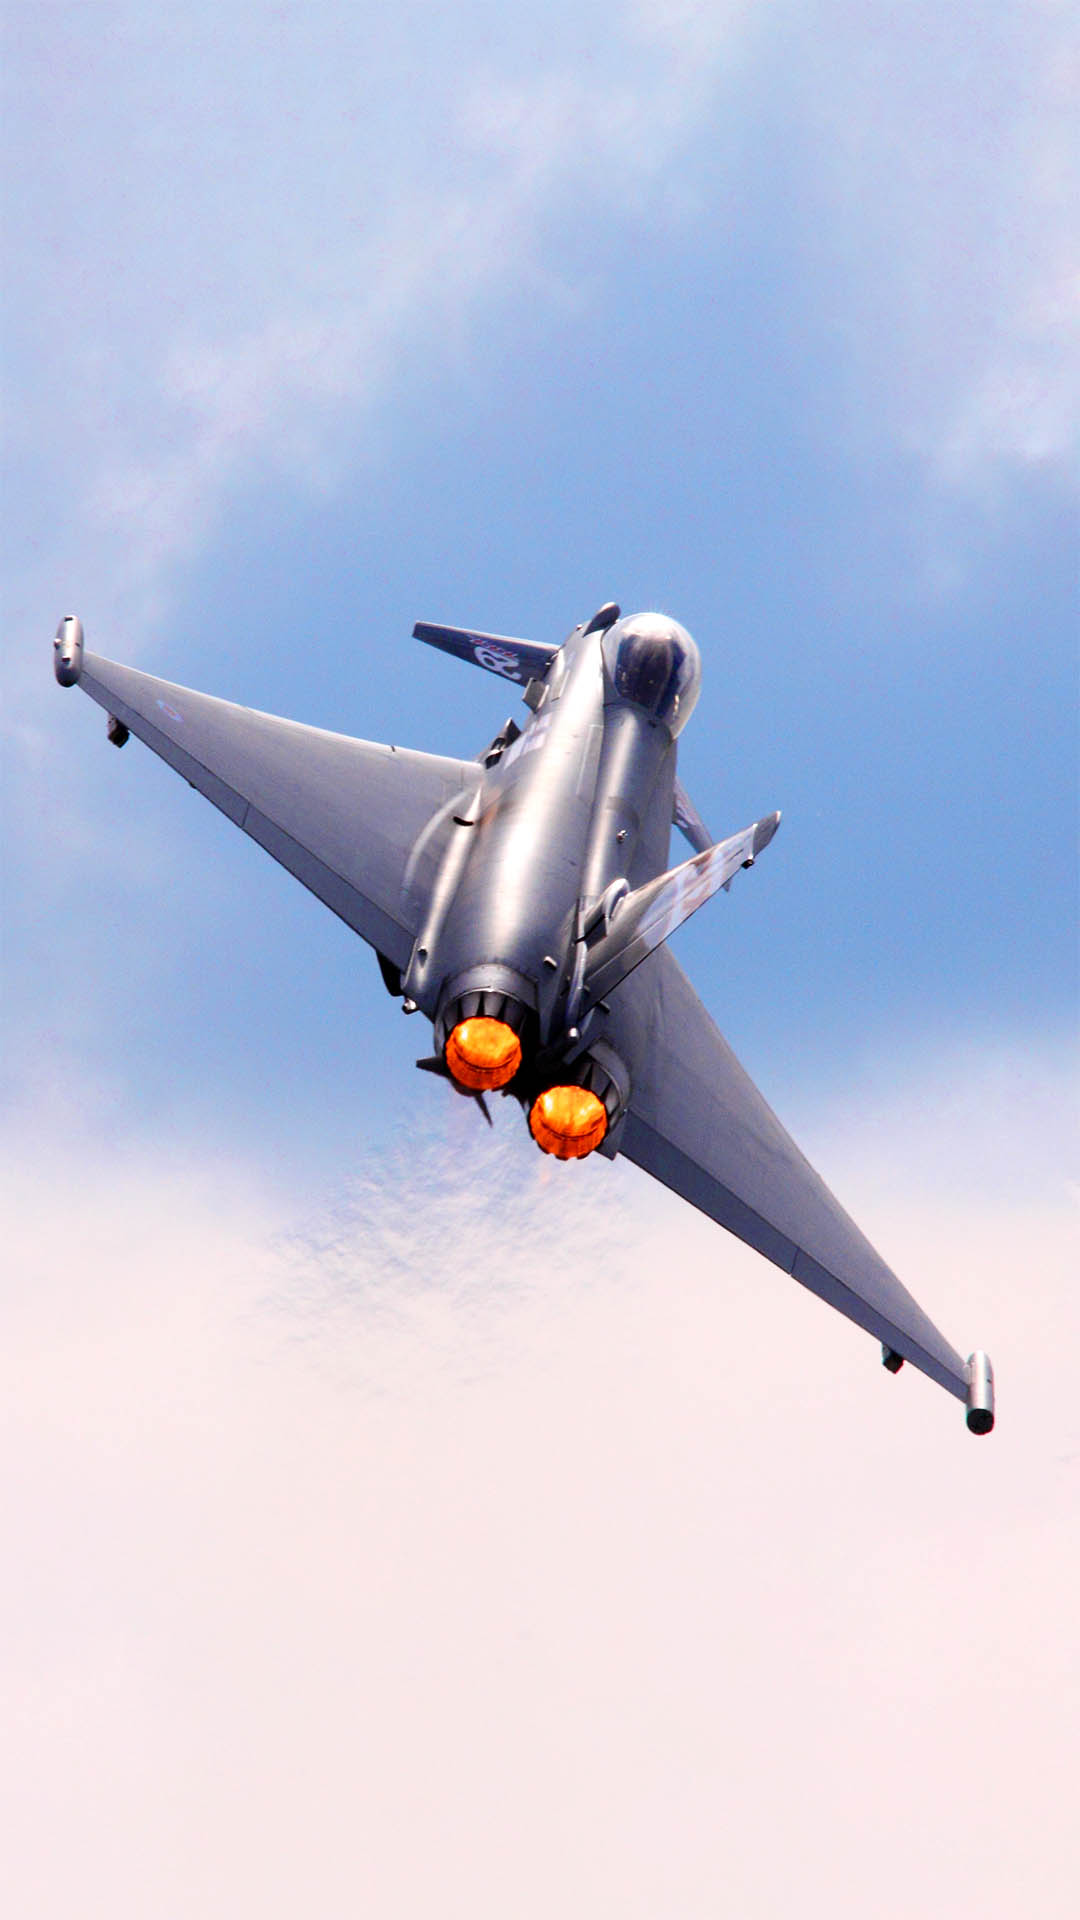 Image featuring jet rising through the sky with its afterburner activated